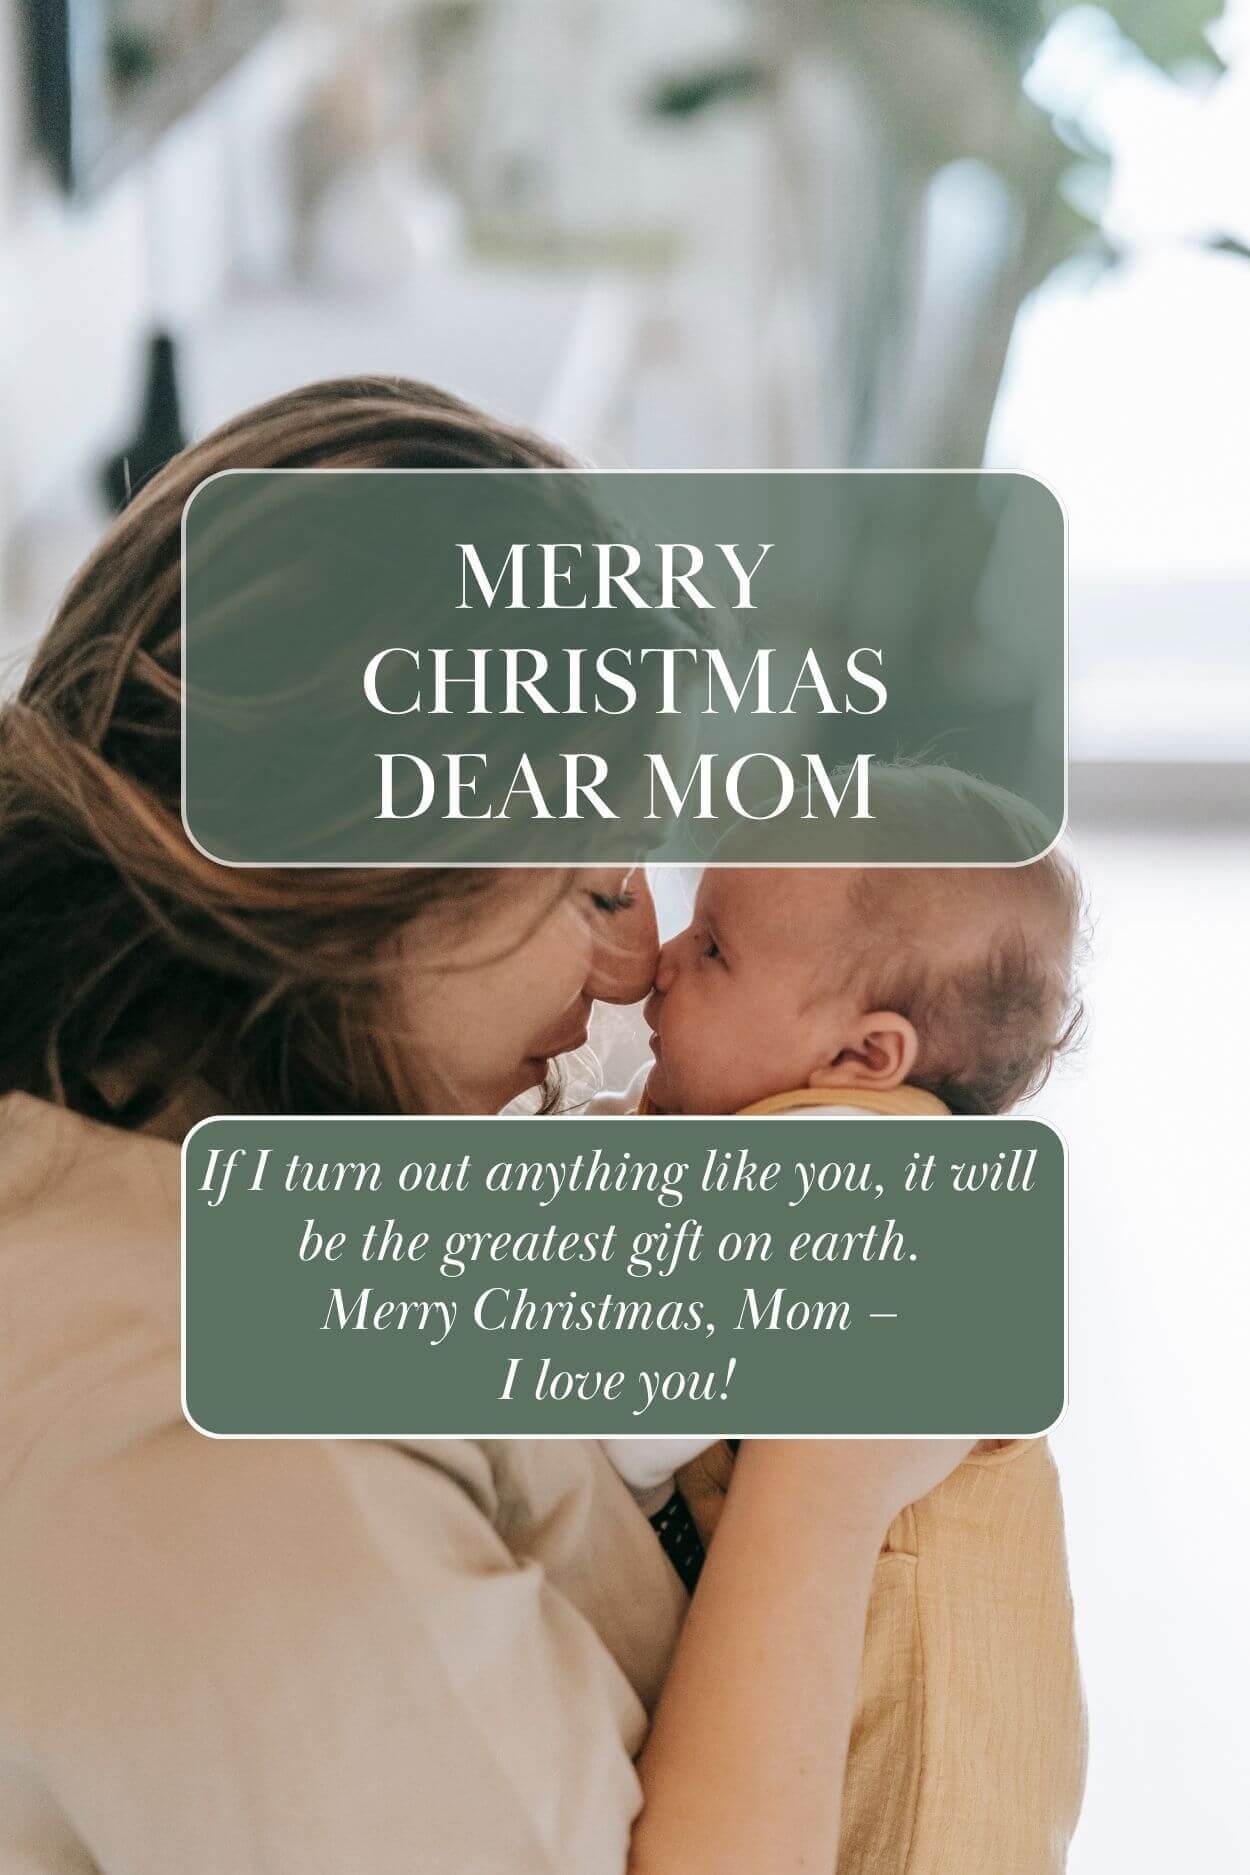 Merry Christmas Wishes To My Mom